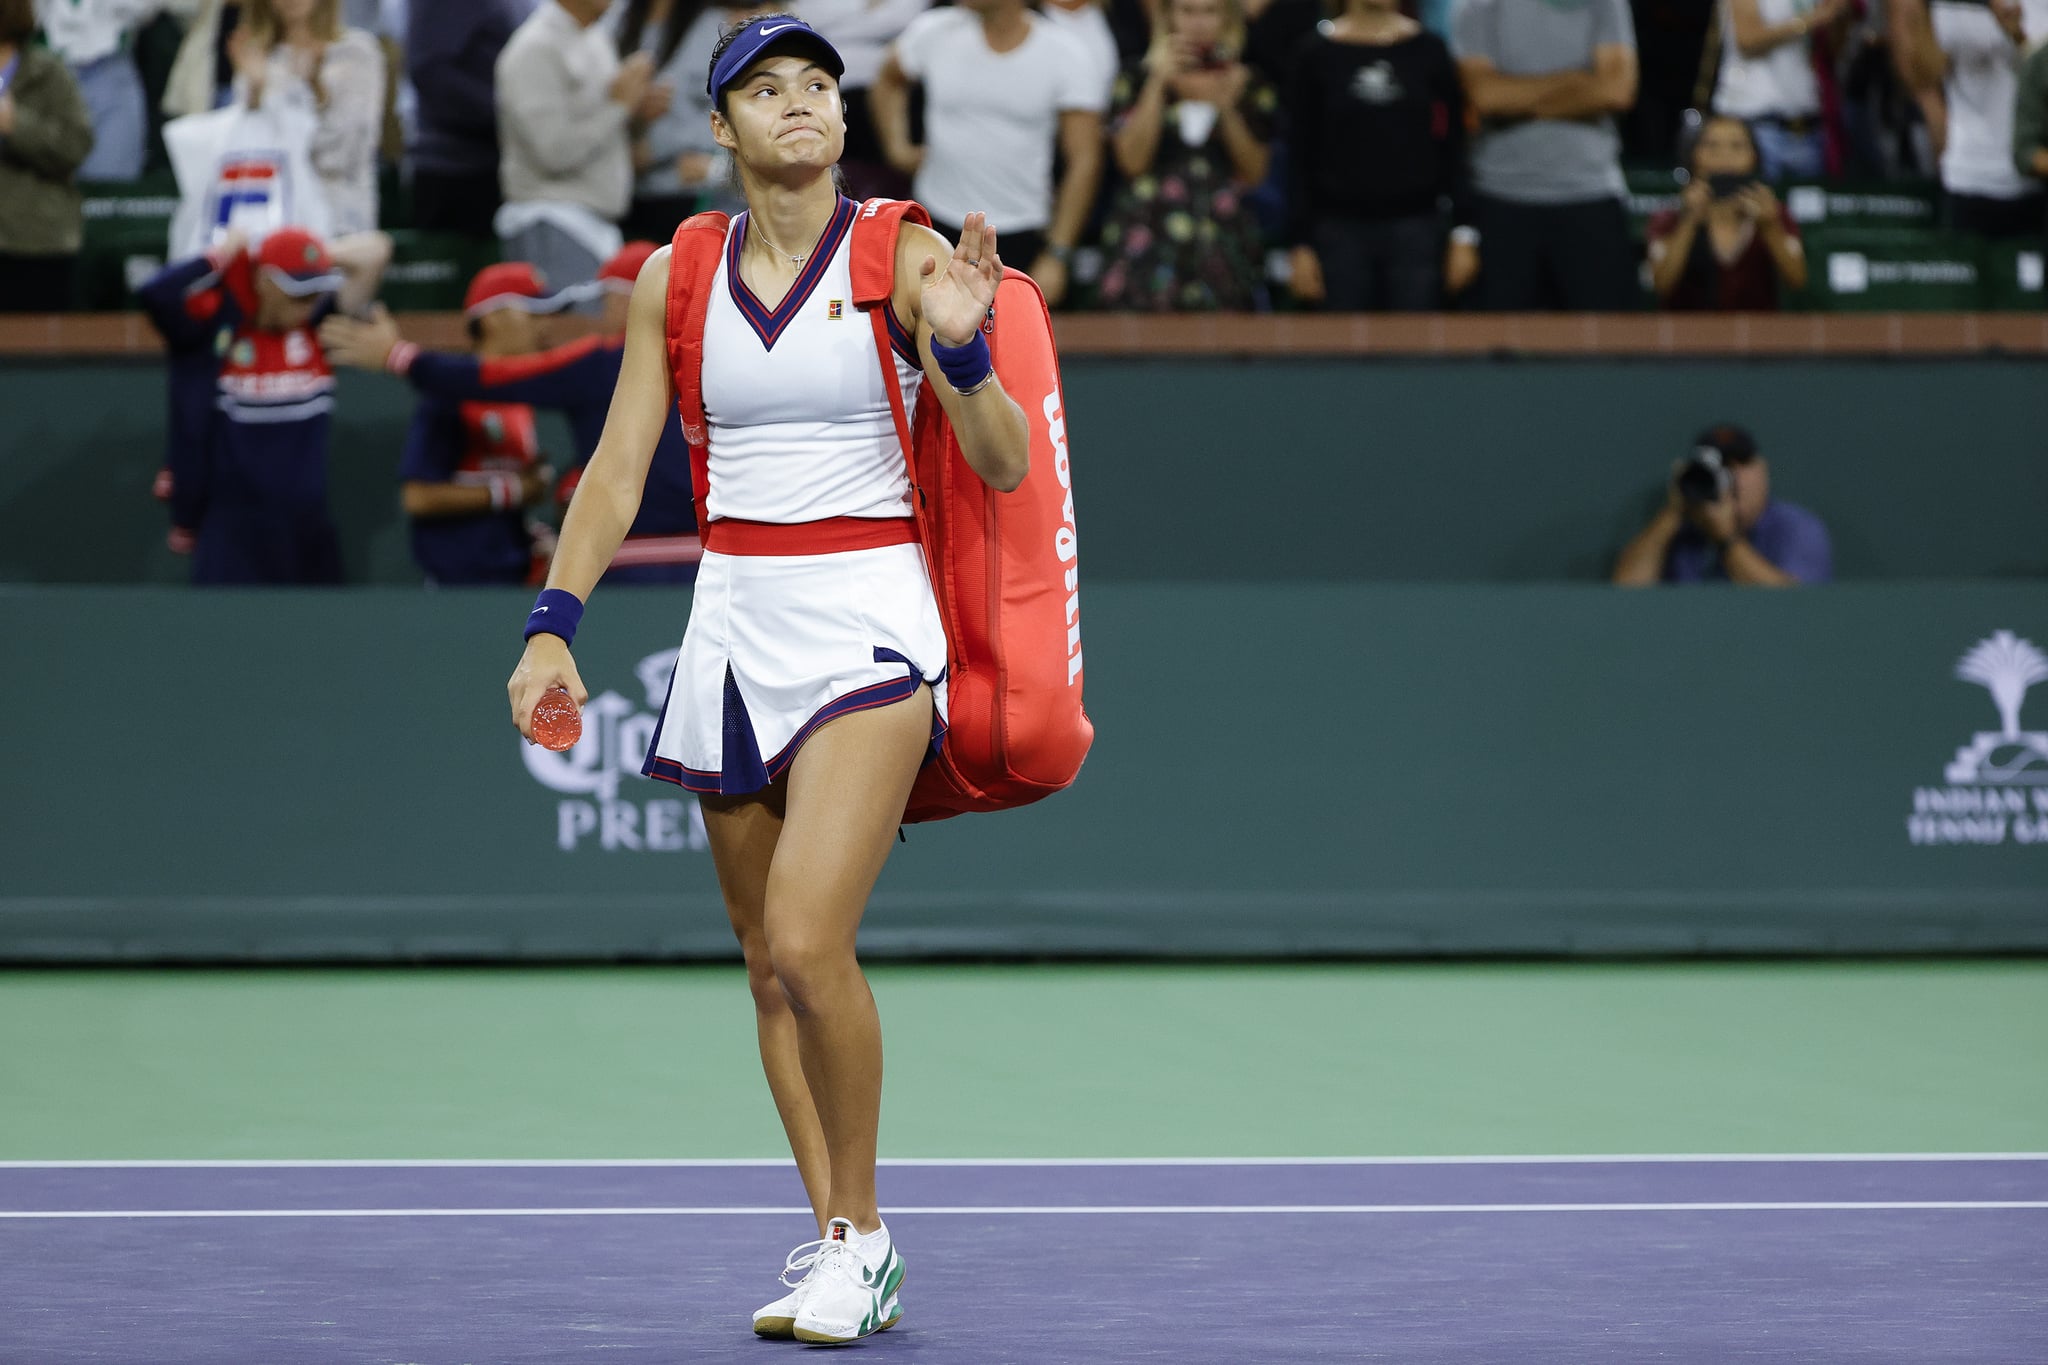 INDIAN WELLS, CALIFORNIA - OCTOBER 08: Emma Raducanu of Great Britain walks off the court after being defeated by Aliaksandra Sasnovich of Belarus during the BNP Paribas Open at the Indian Wells Tennis Garden on October 08, 2021 in Indian Wells, California. (Photo by Tim Nwachukwu/Getty Images)